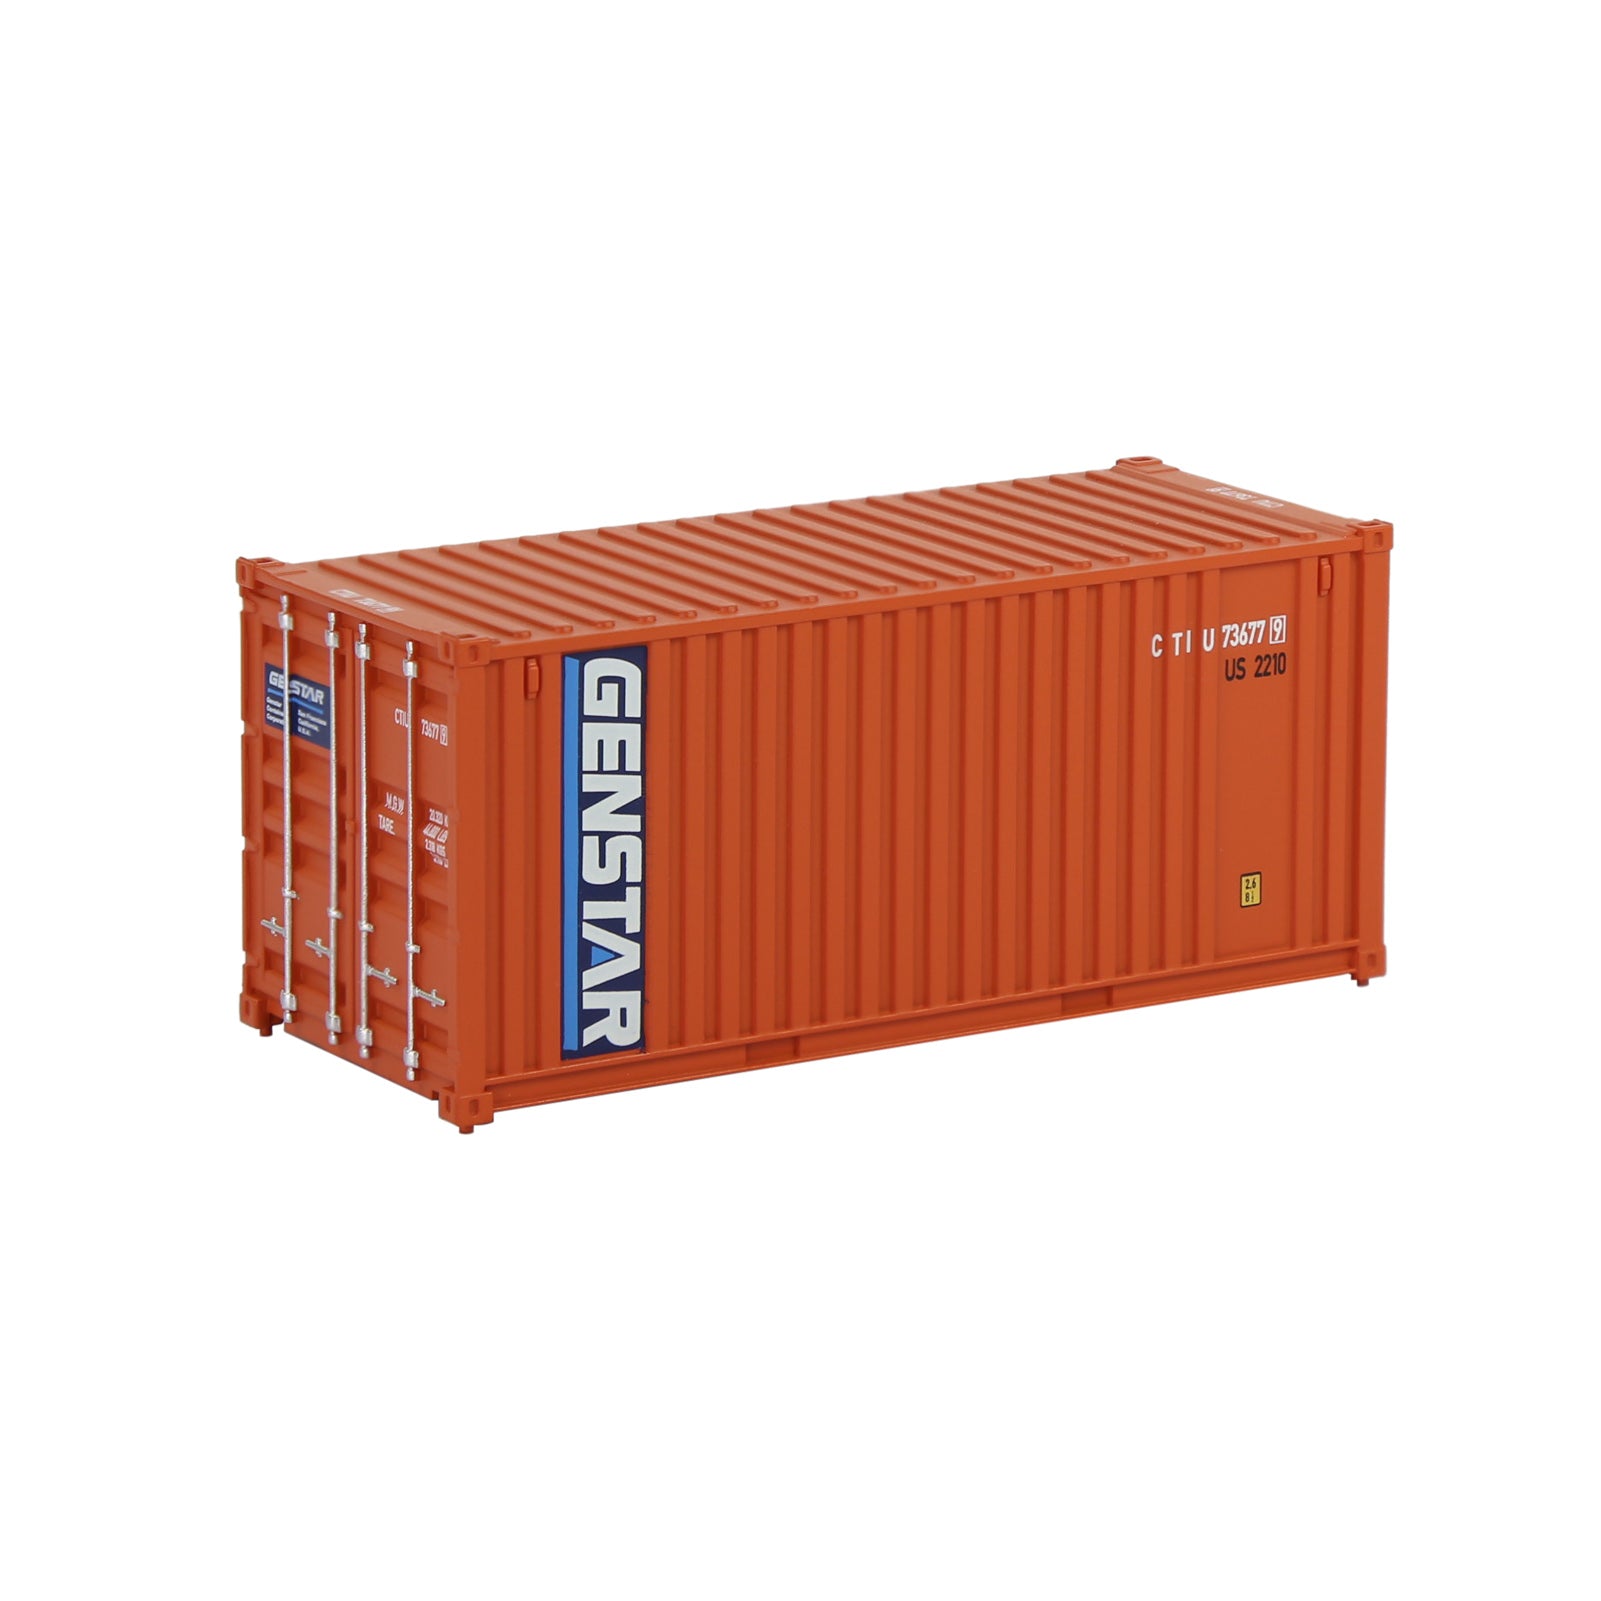 Evemodel HO Gauge 1:87 20ft Shipping Container 20' Cargo Box Model Railway  C8726